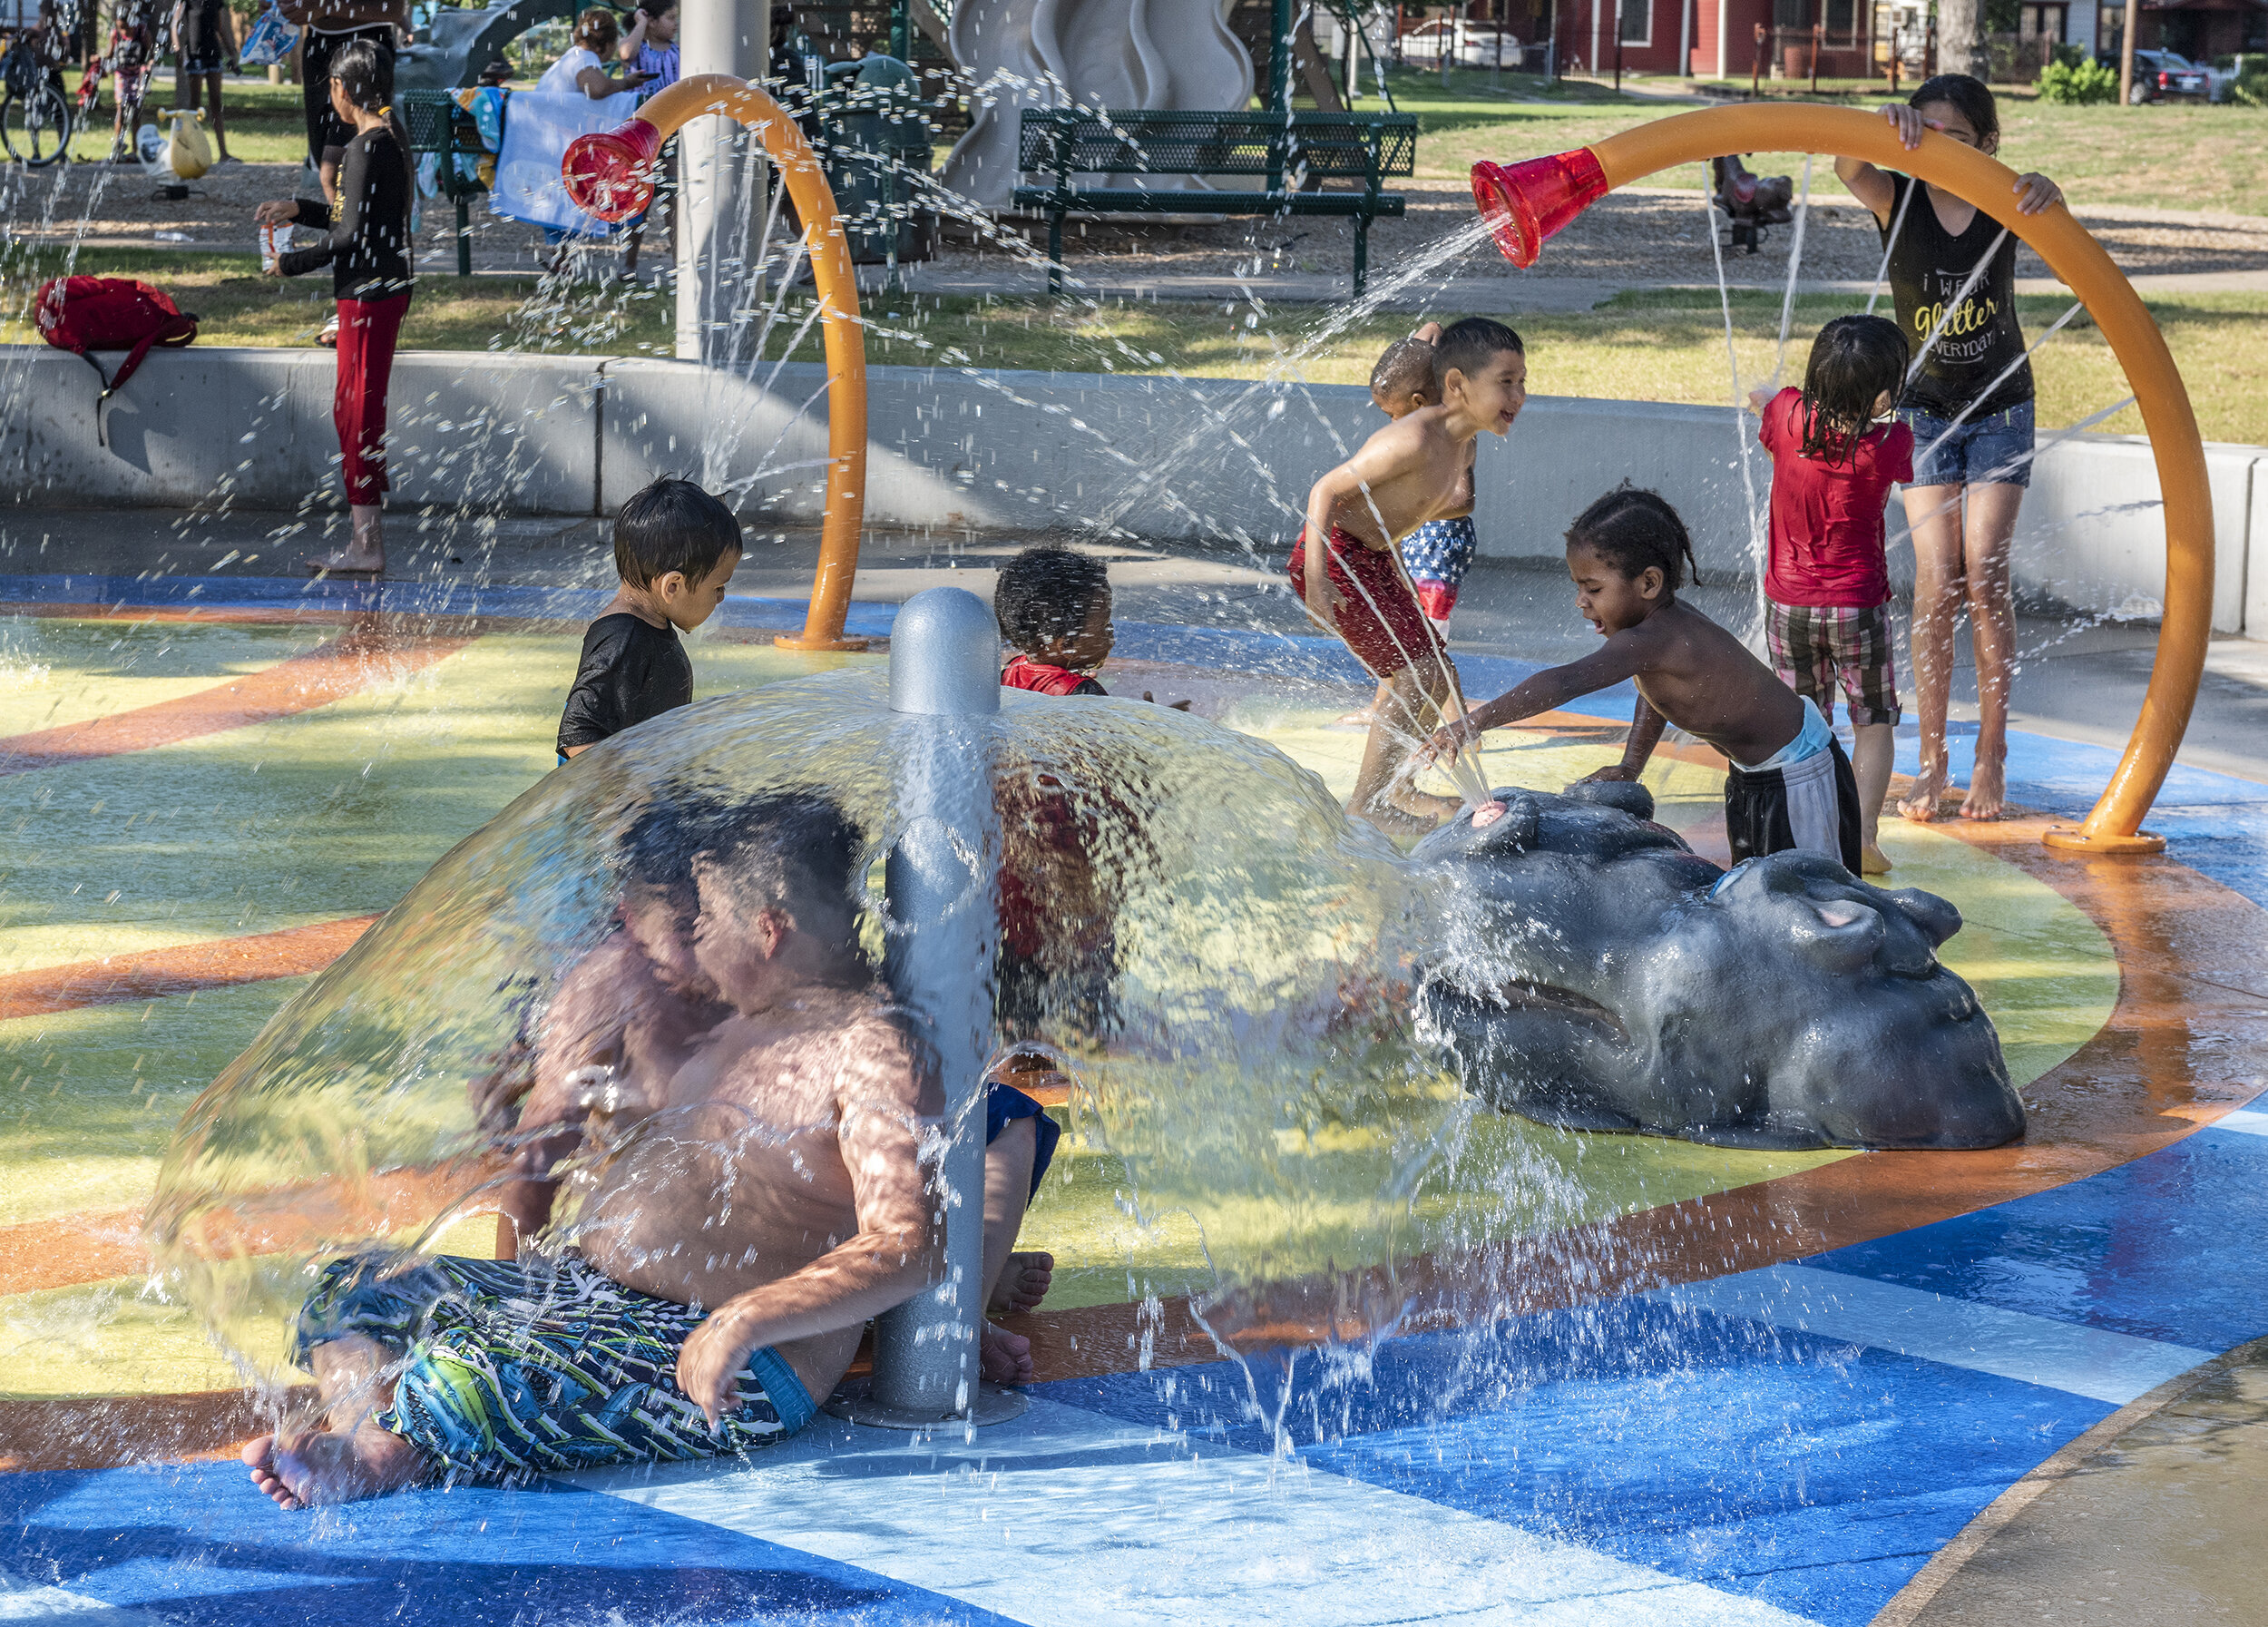 How To Design Inclusive Play On Splash Pads — Parks & Rec Business (PRB)